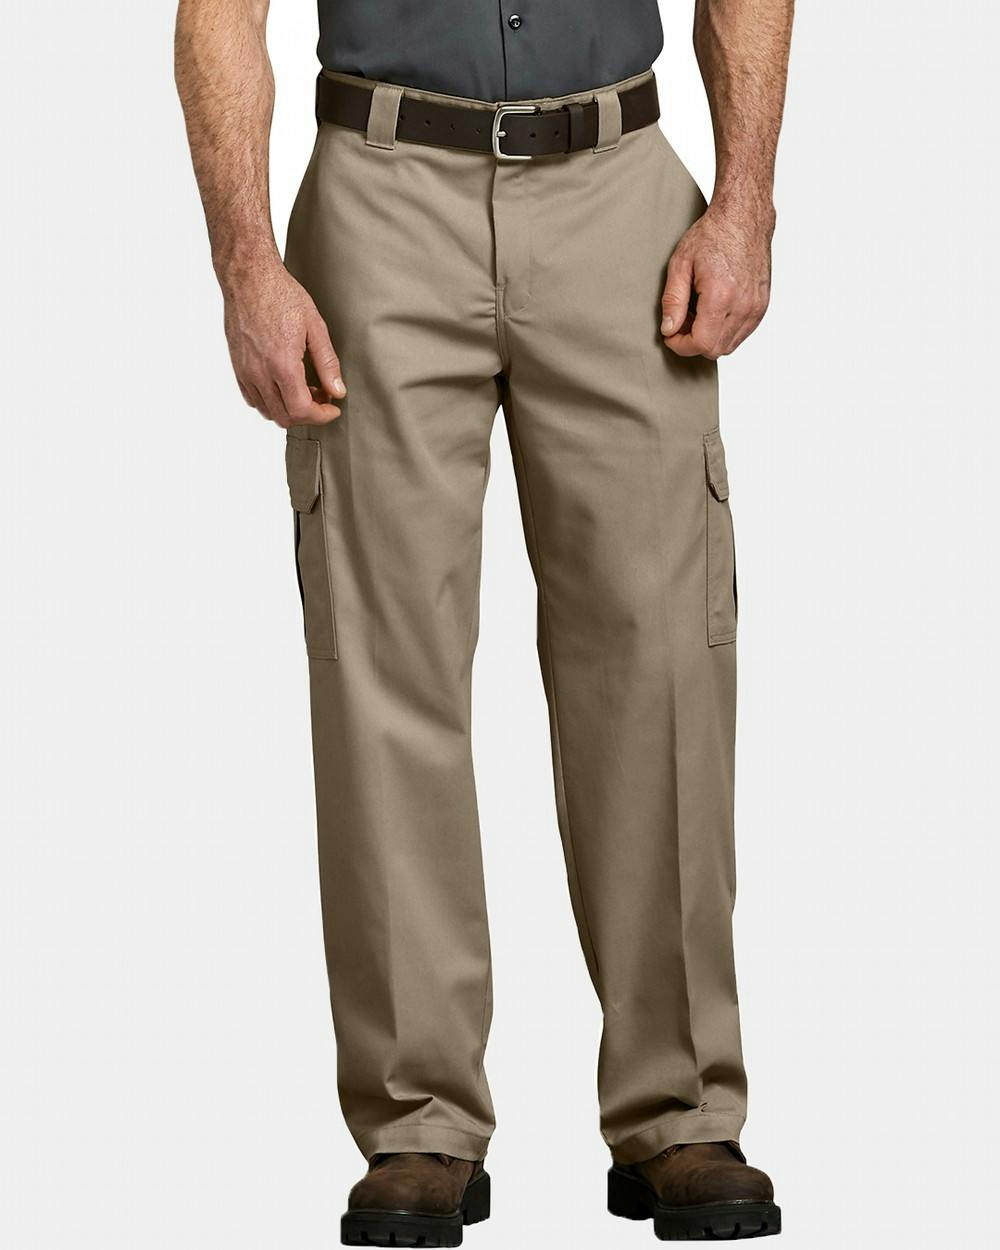 RELAXED FIT STRAIGHT LEG CARGO PANT